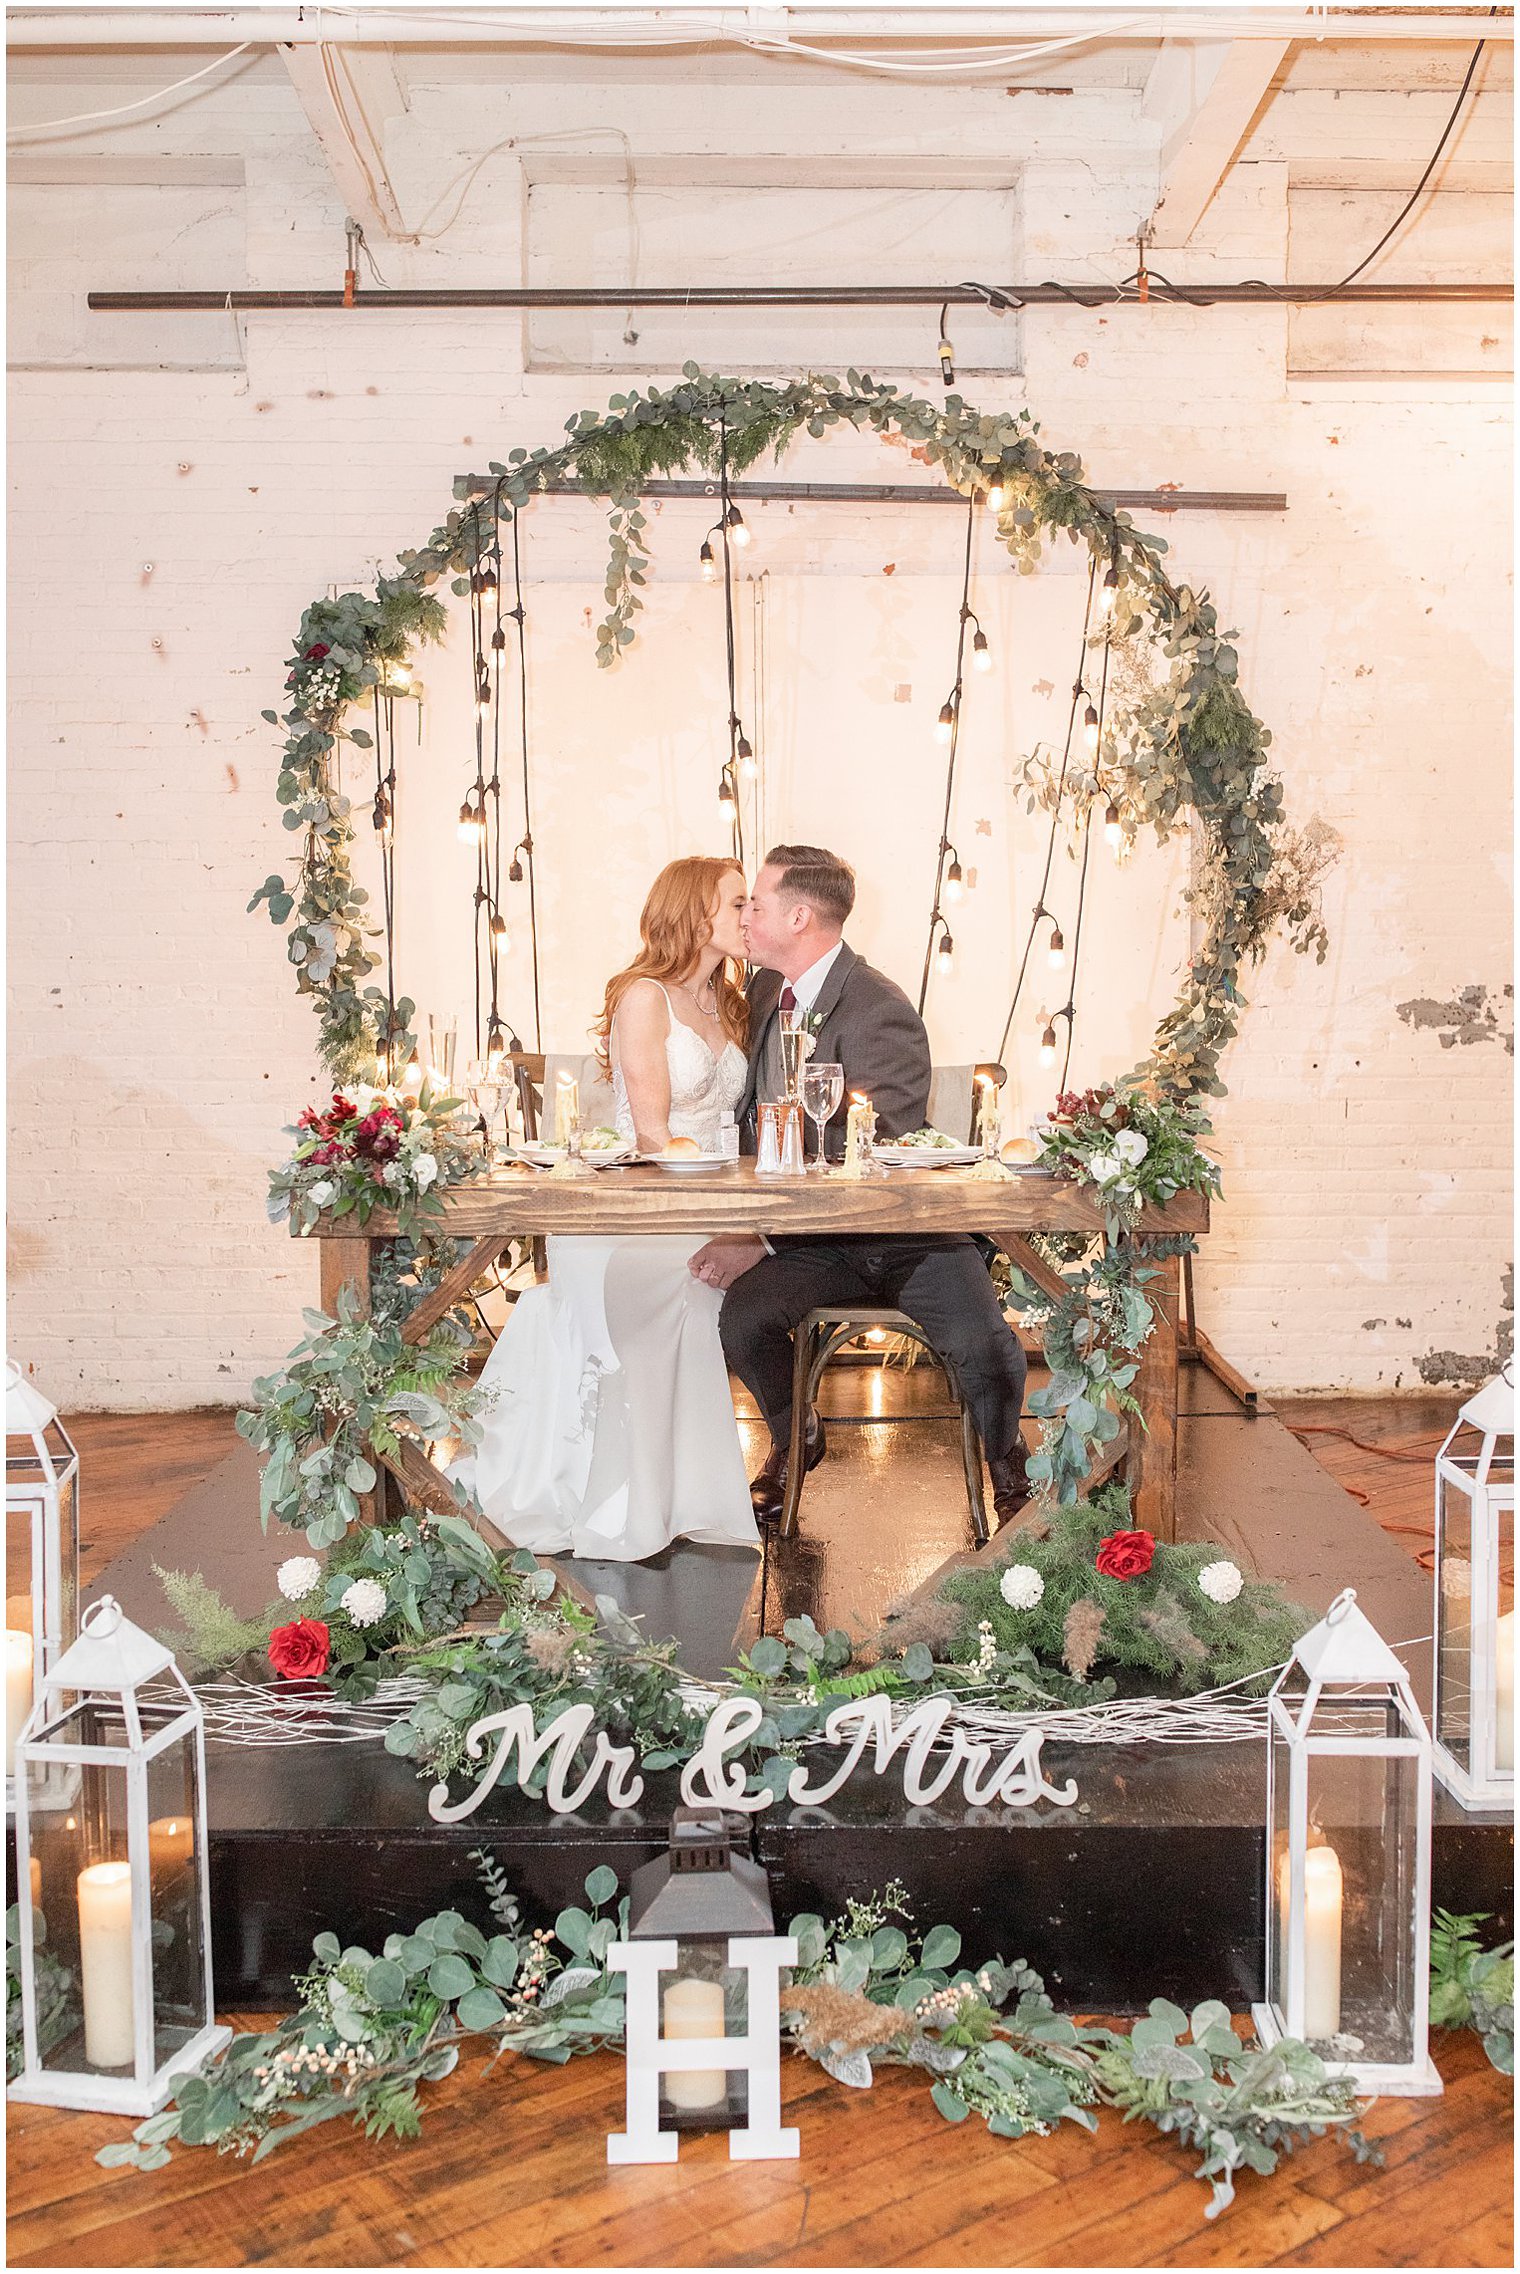 sweetheart table for Art Factory Studios wedding with greenery covered metal arbor and lanterns